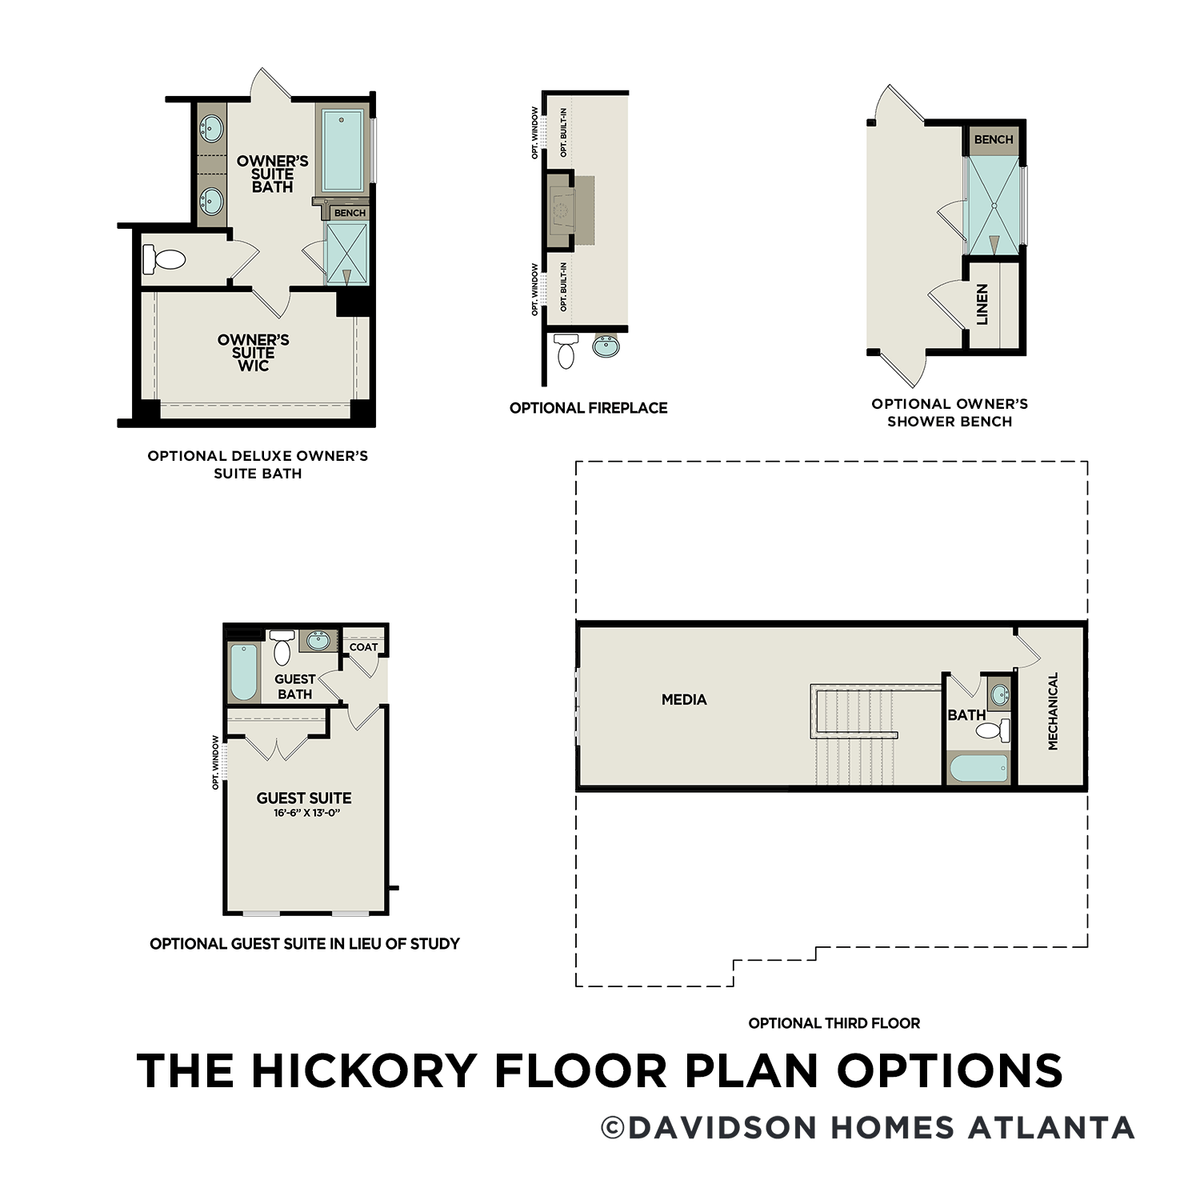 4 - The Hickory B floor plan layout for 93 Laurelwood Lane in Davidson Homes' Riverwood community.